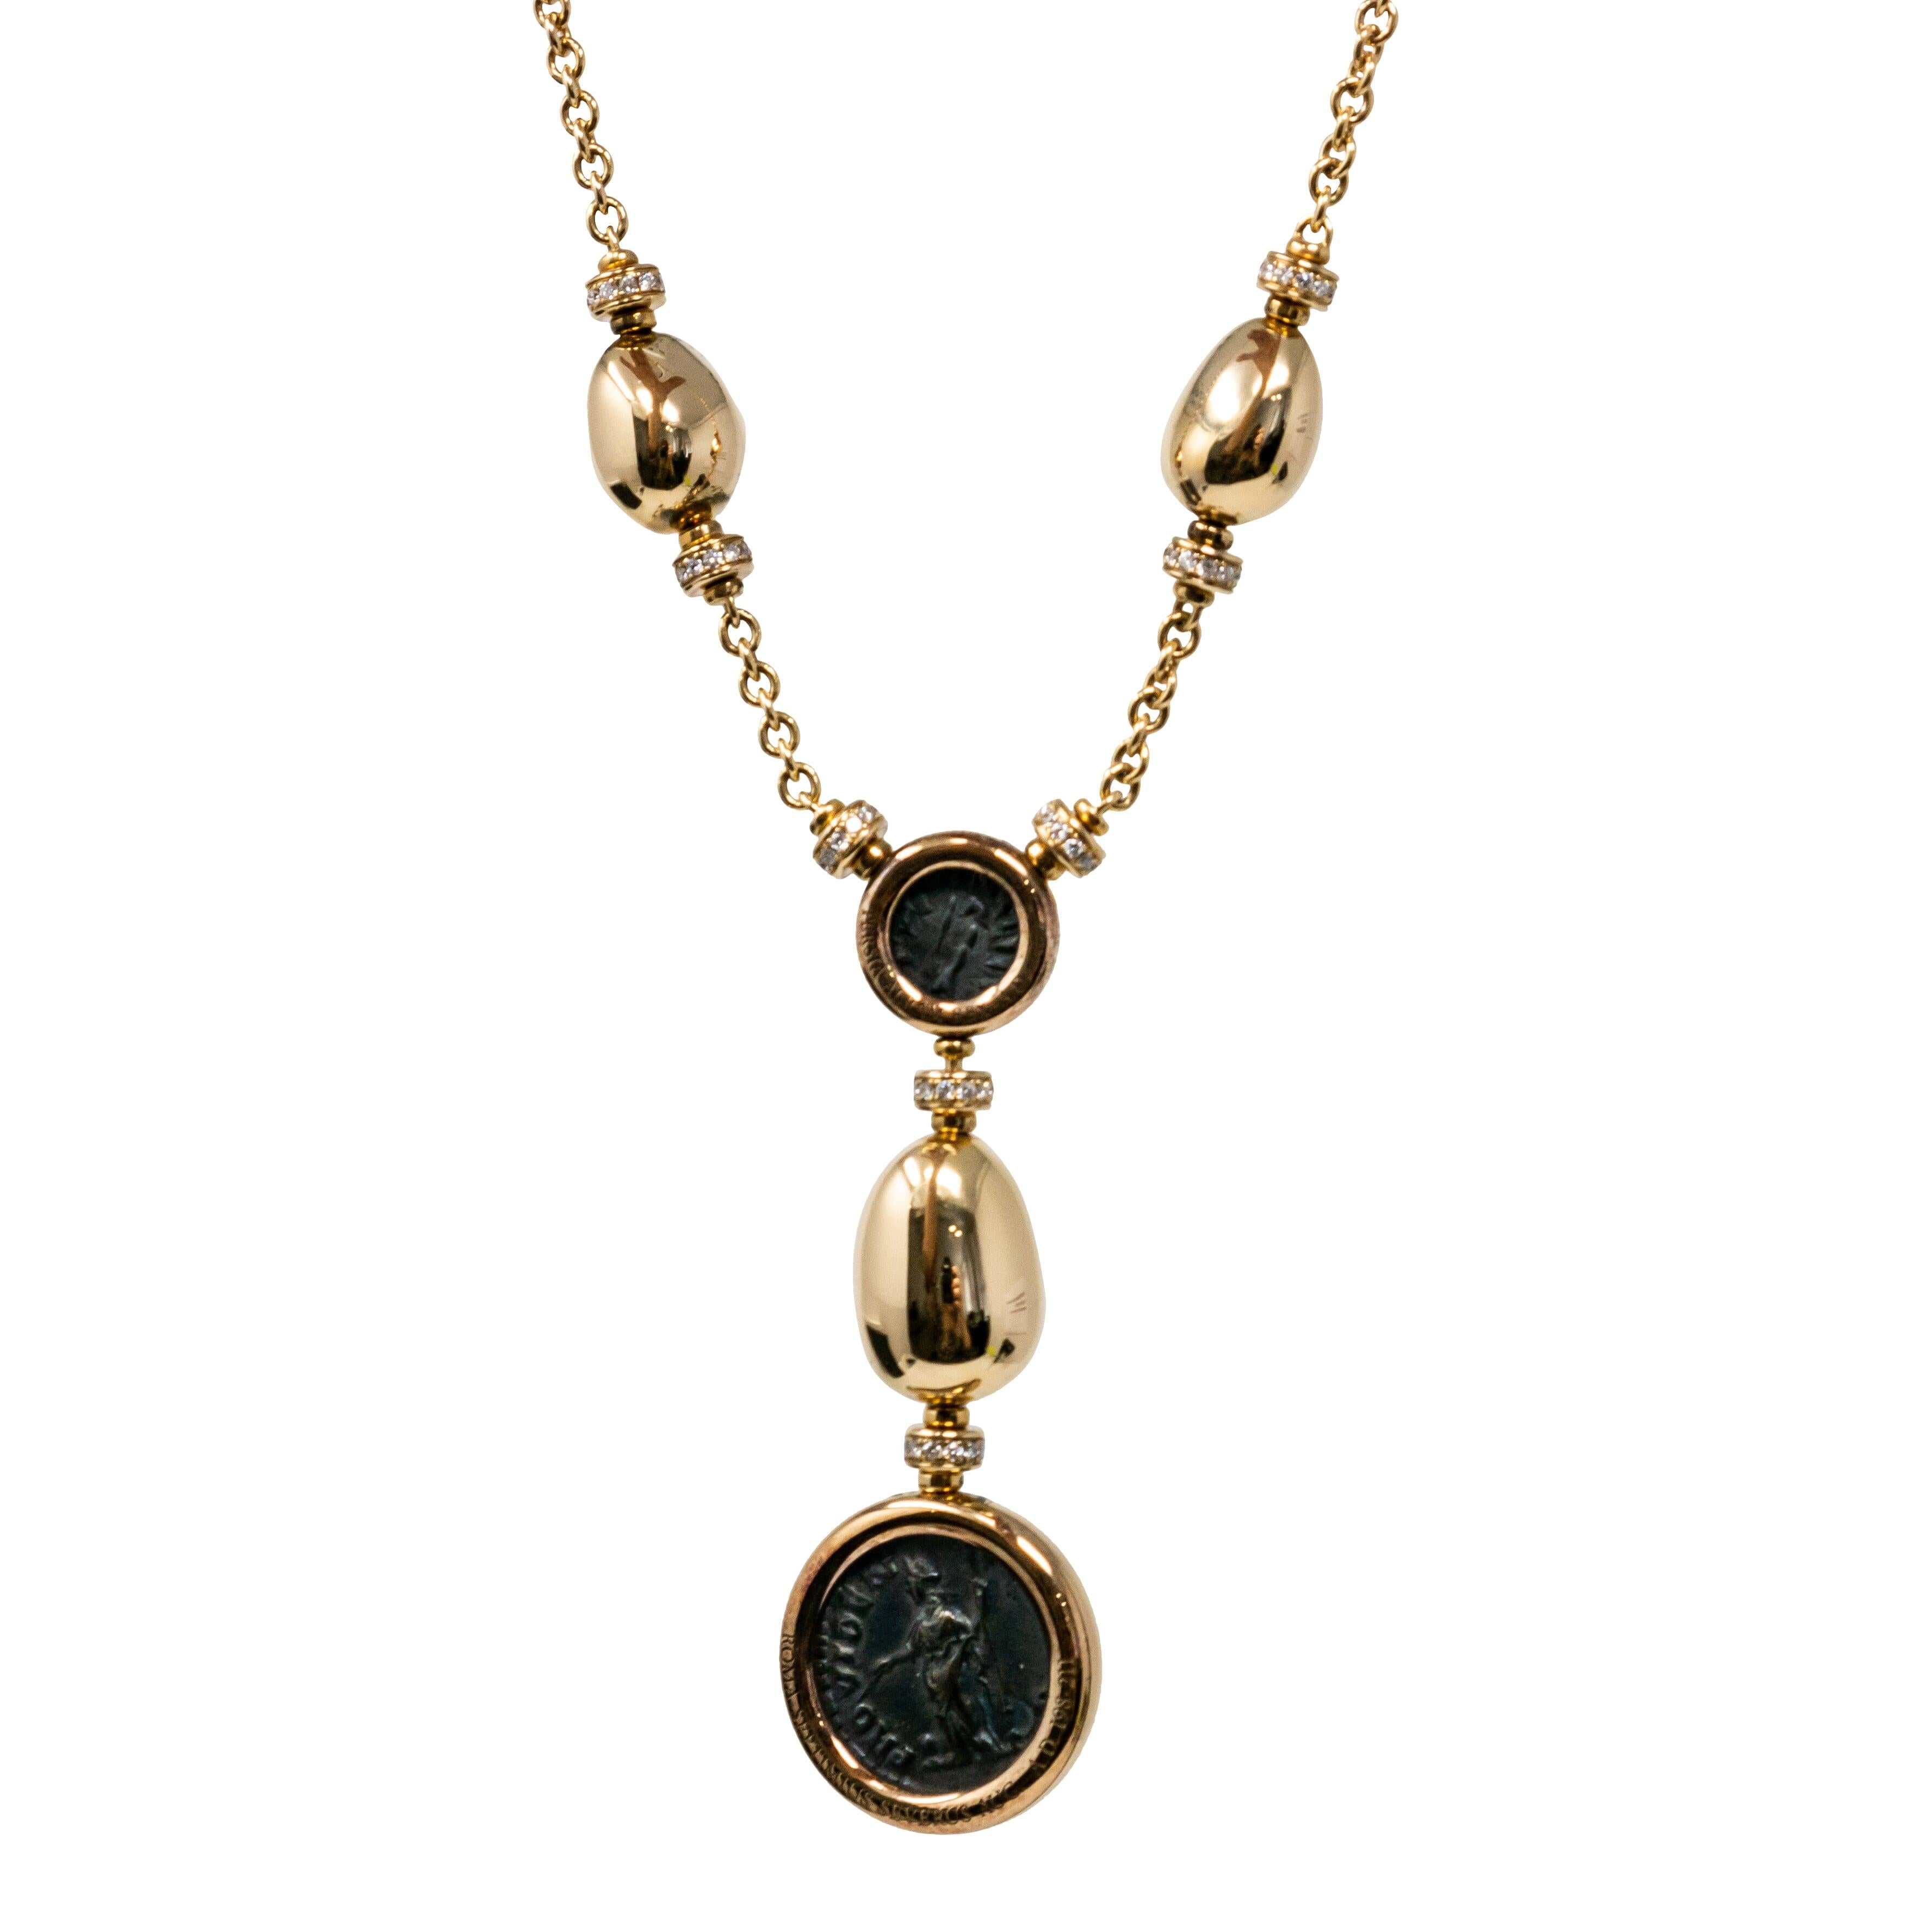 BVLGARI Yellow Gold Diamonds Pendant with Chain Necklace Size ; 30 total grams in 18k gold; 0.2total grams in diamonds
